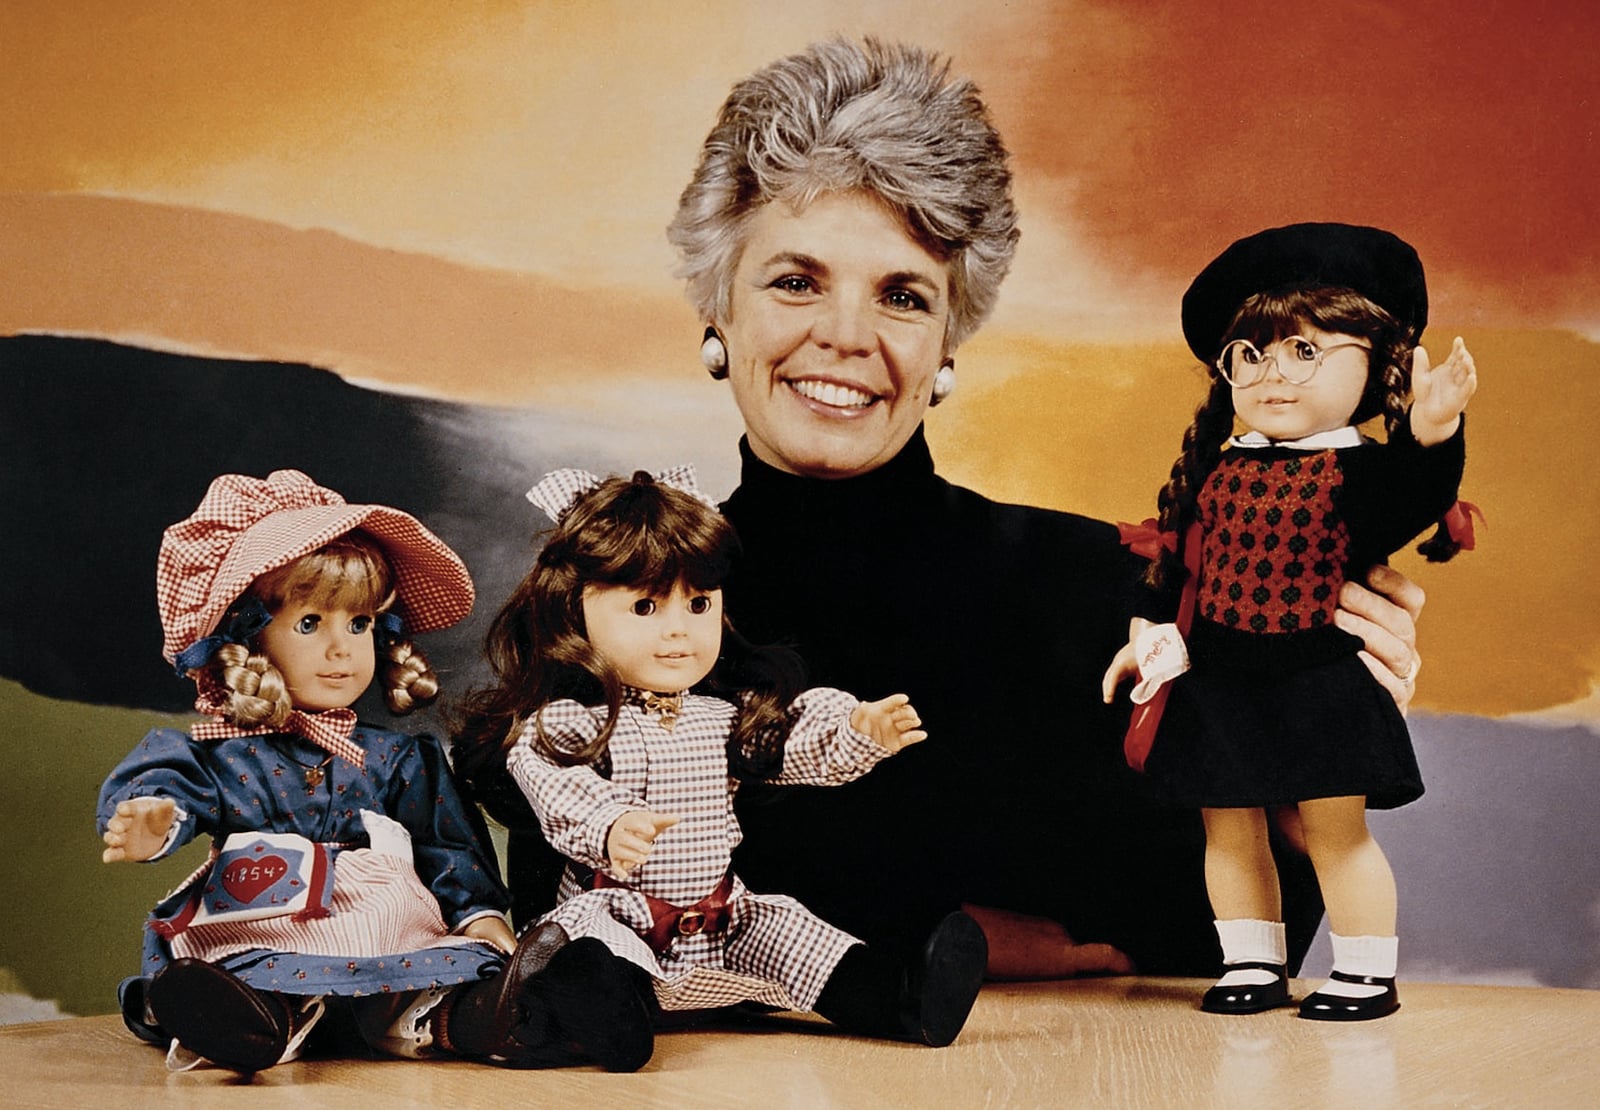 Original American Girl Dolls Released For 35th Anniversary